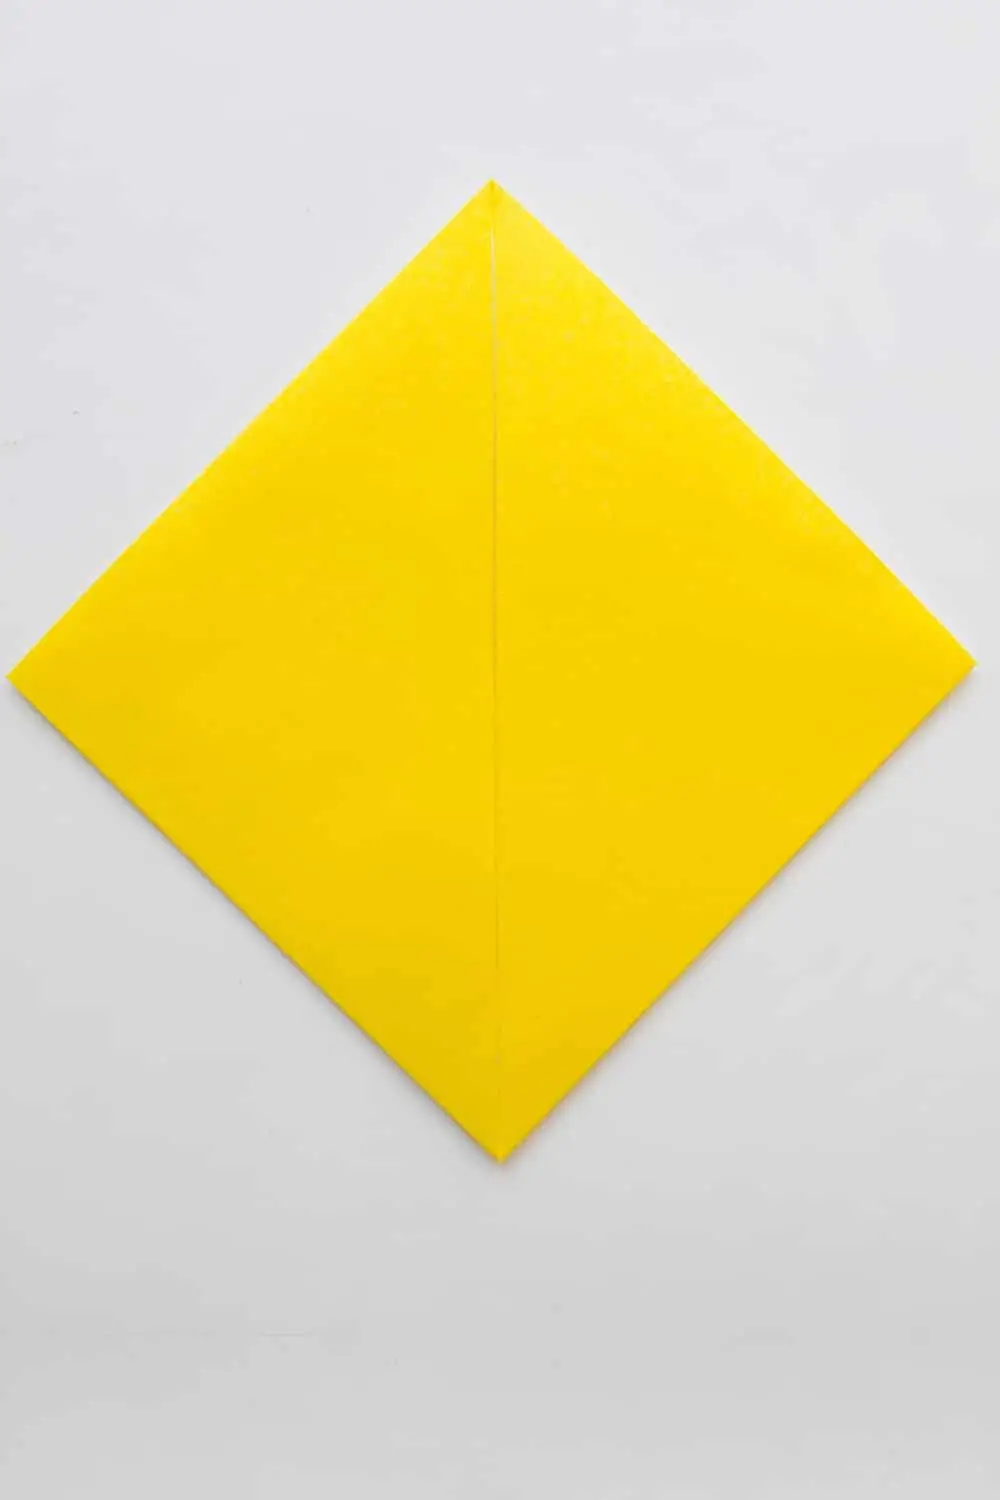 4 yellow paper square